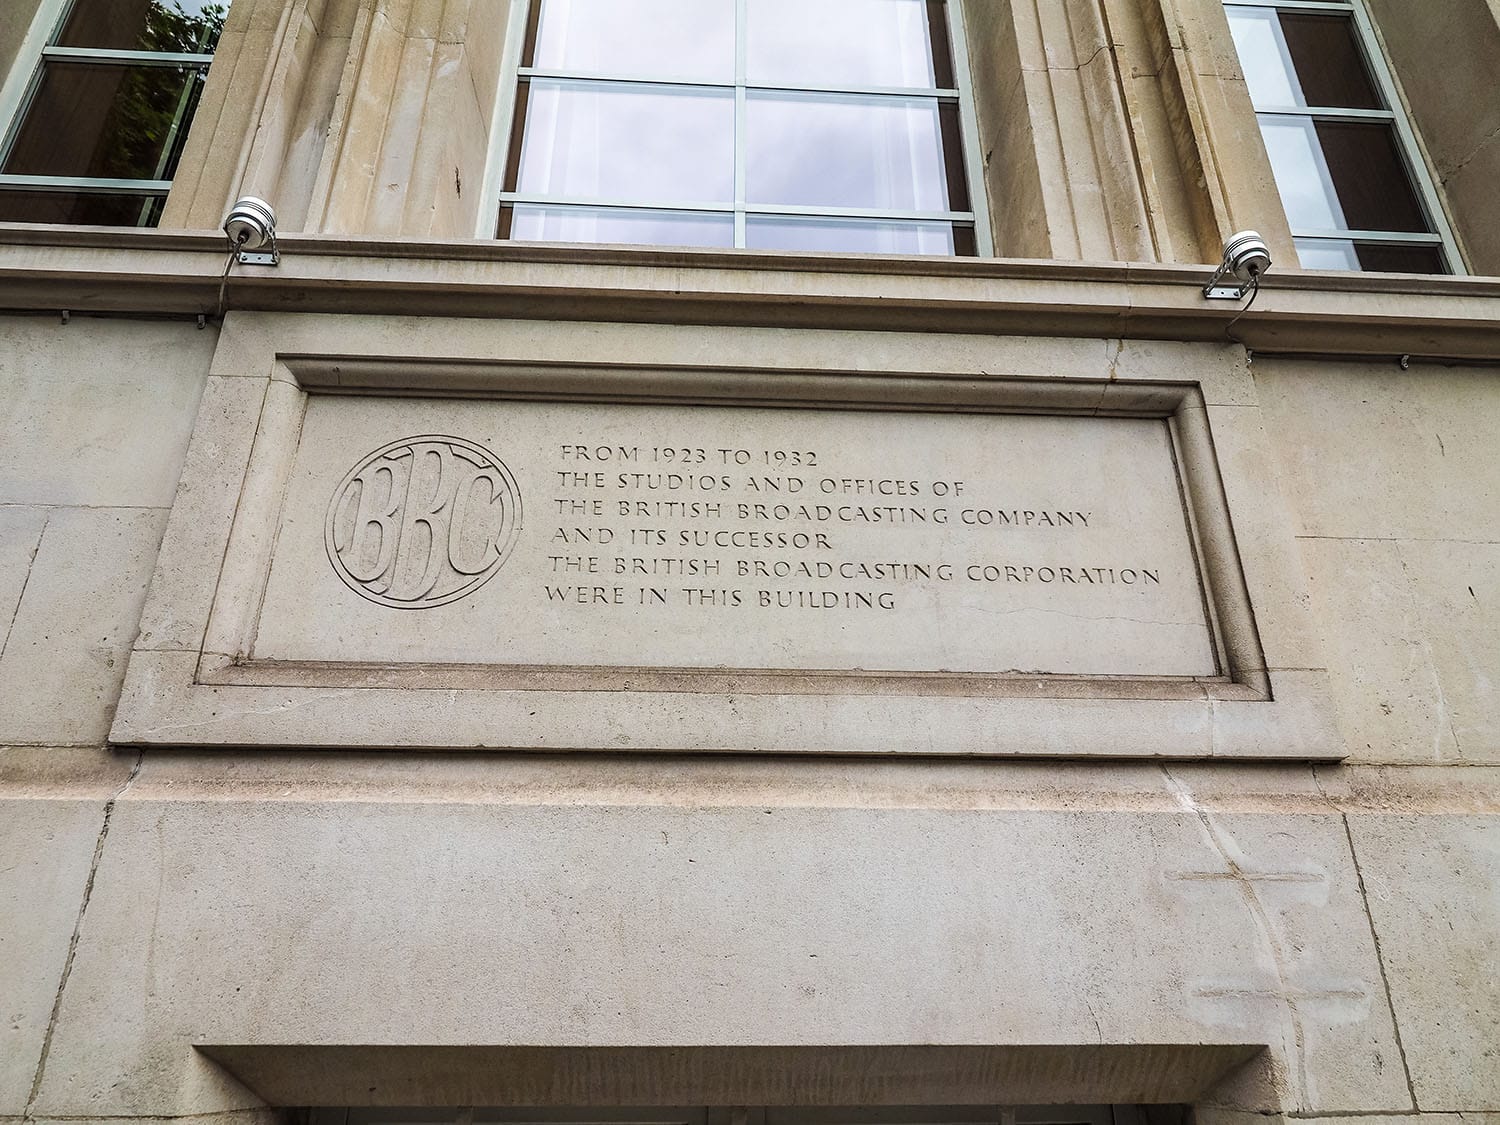 Engraved stone commemorating the site of the first BBC studios at Savoy Hill on The Strand in central London. Credit: Shutterstock